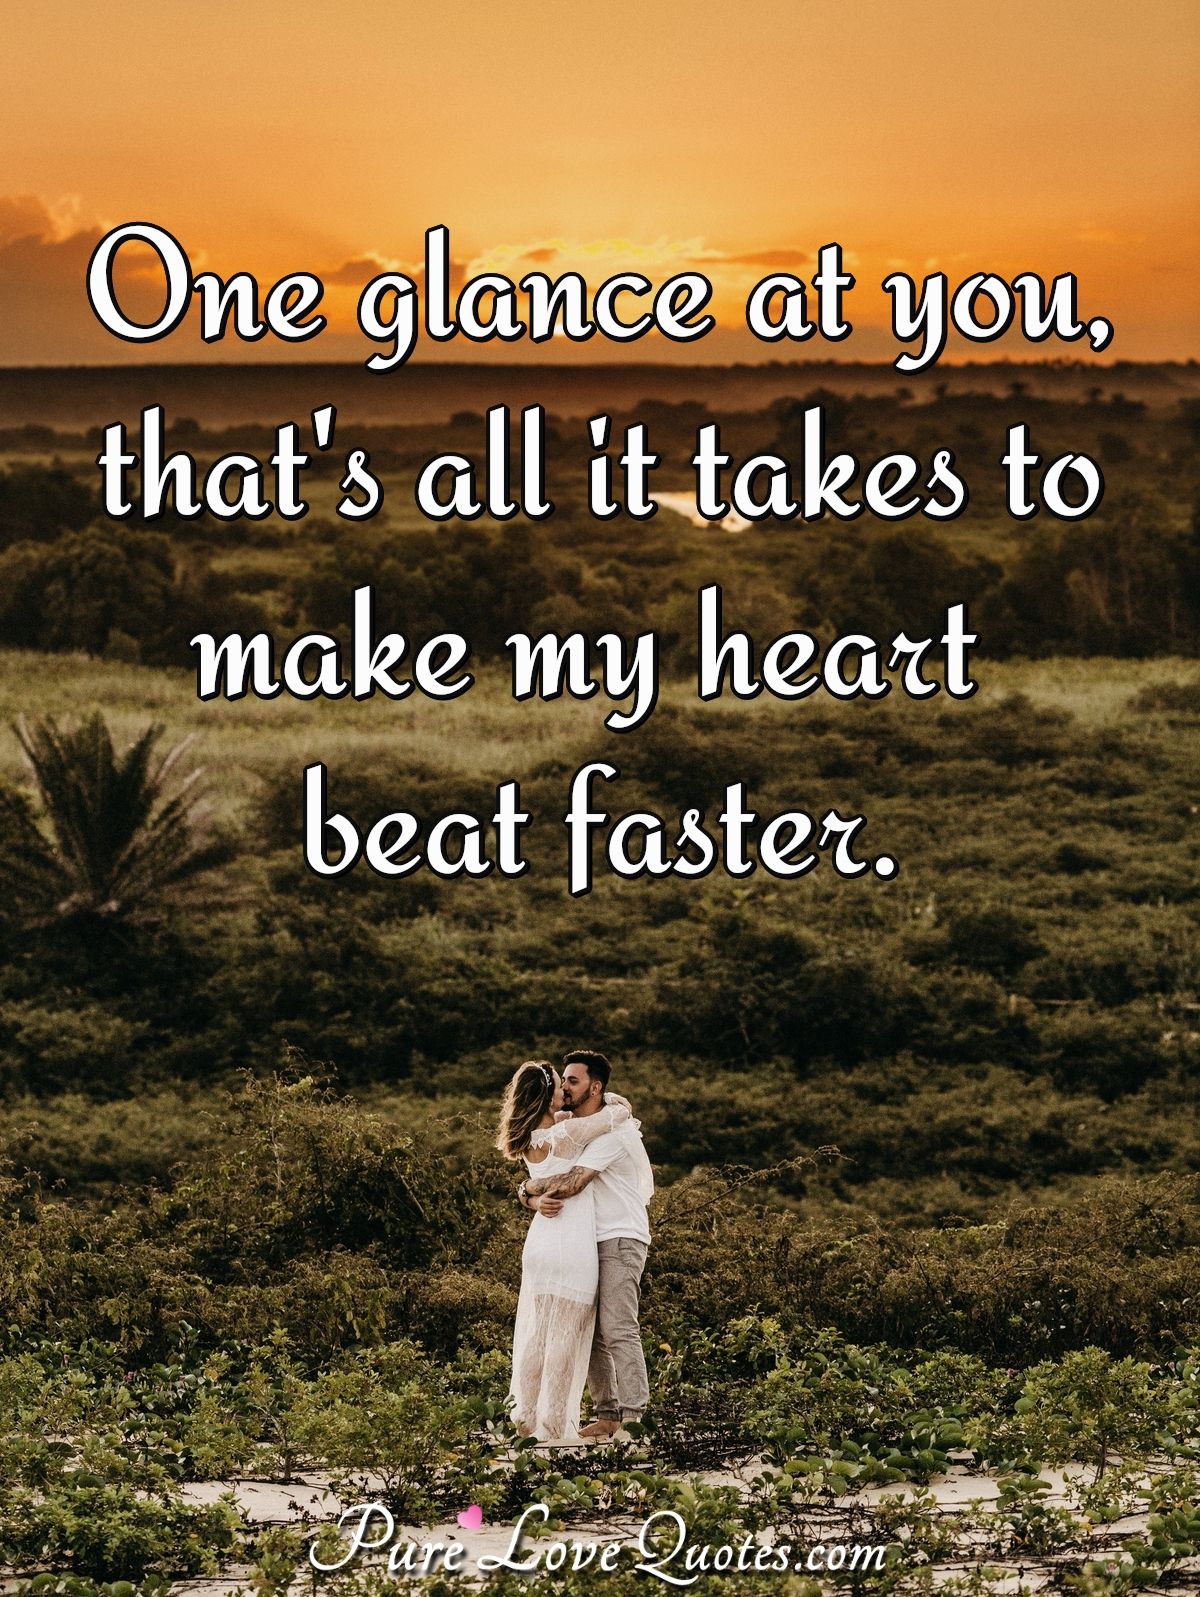 One glance at you, that's all it to make heart beat faster. | PureLoveQuotes